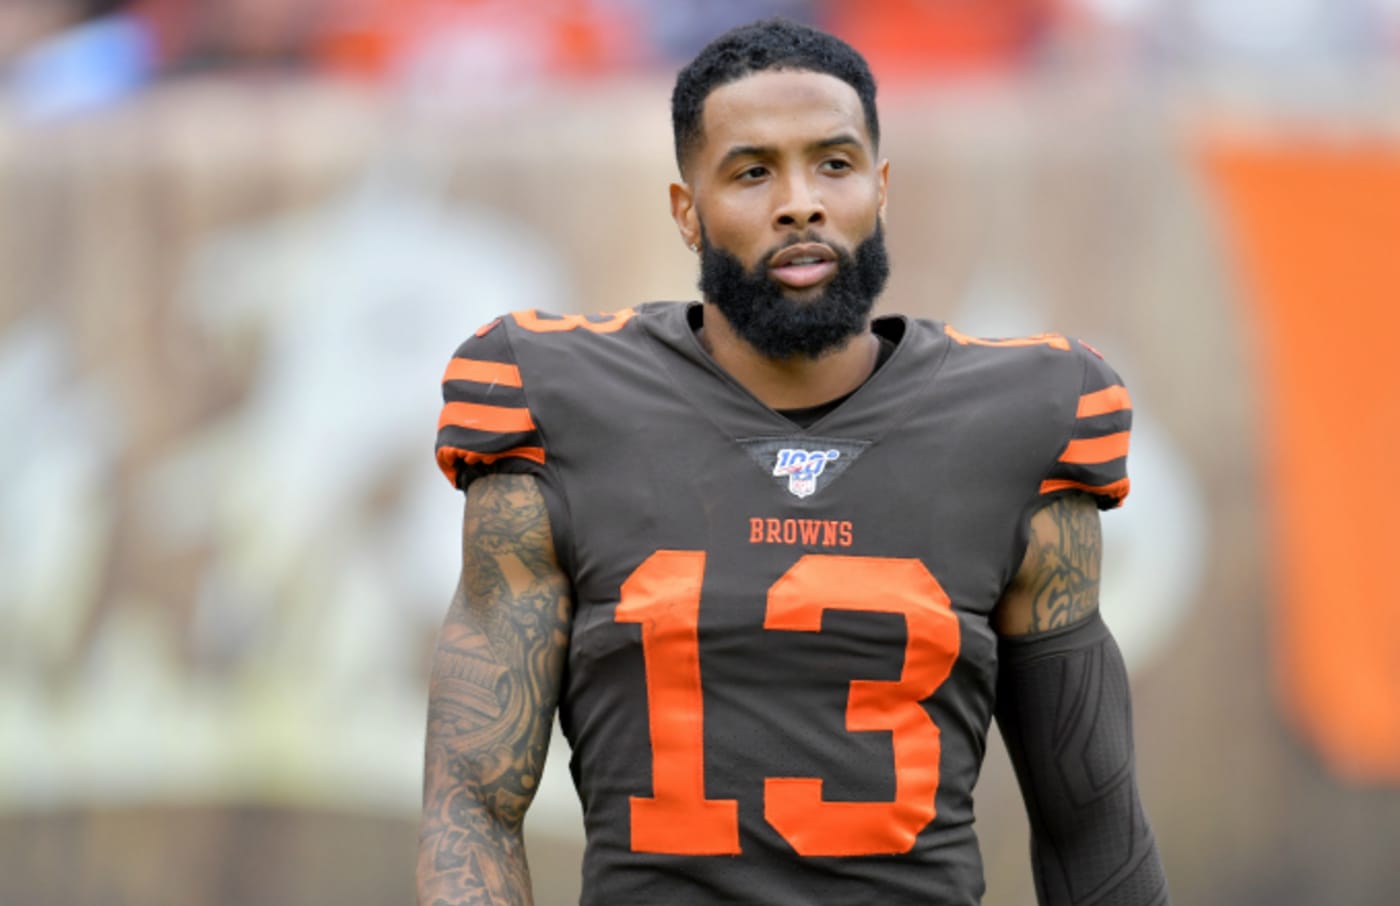 Wide receiver Odell Beckham #13 of the Cleveland Browns